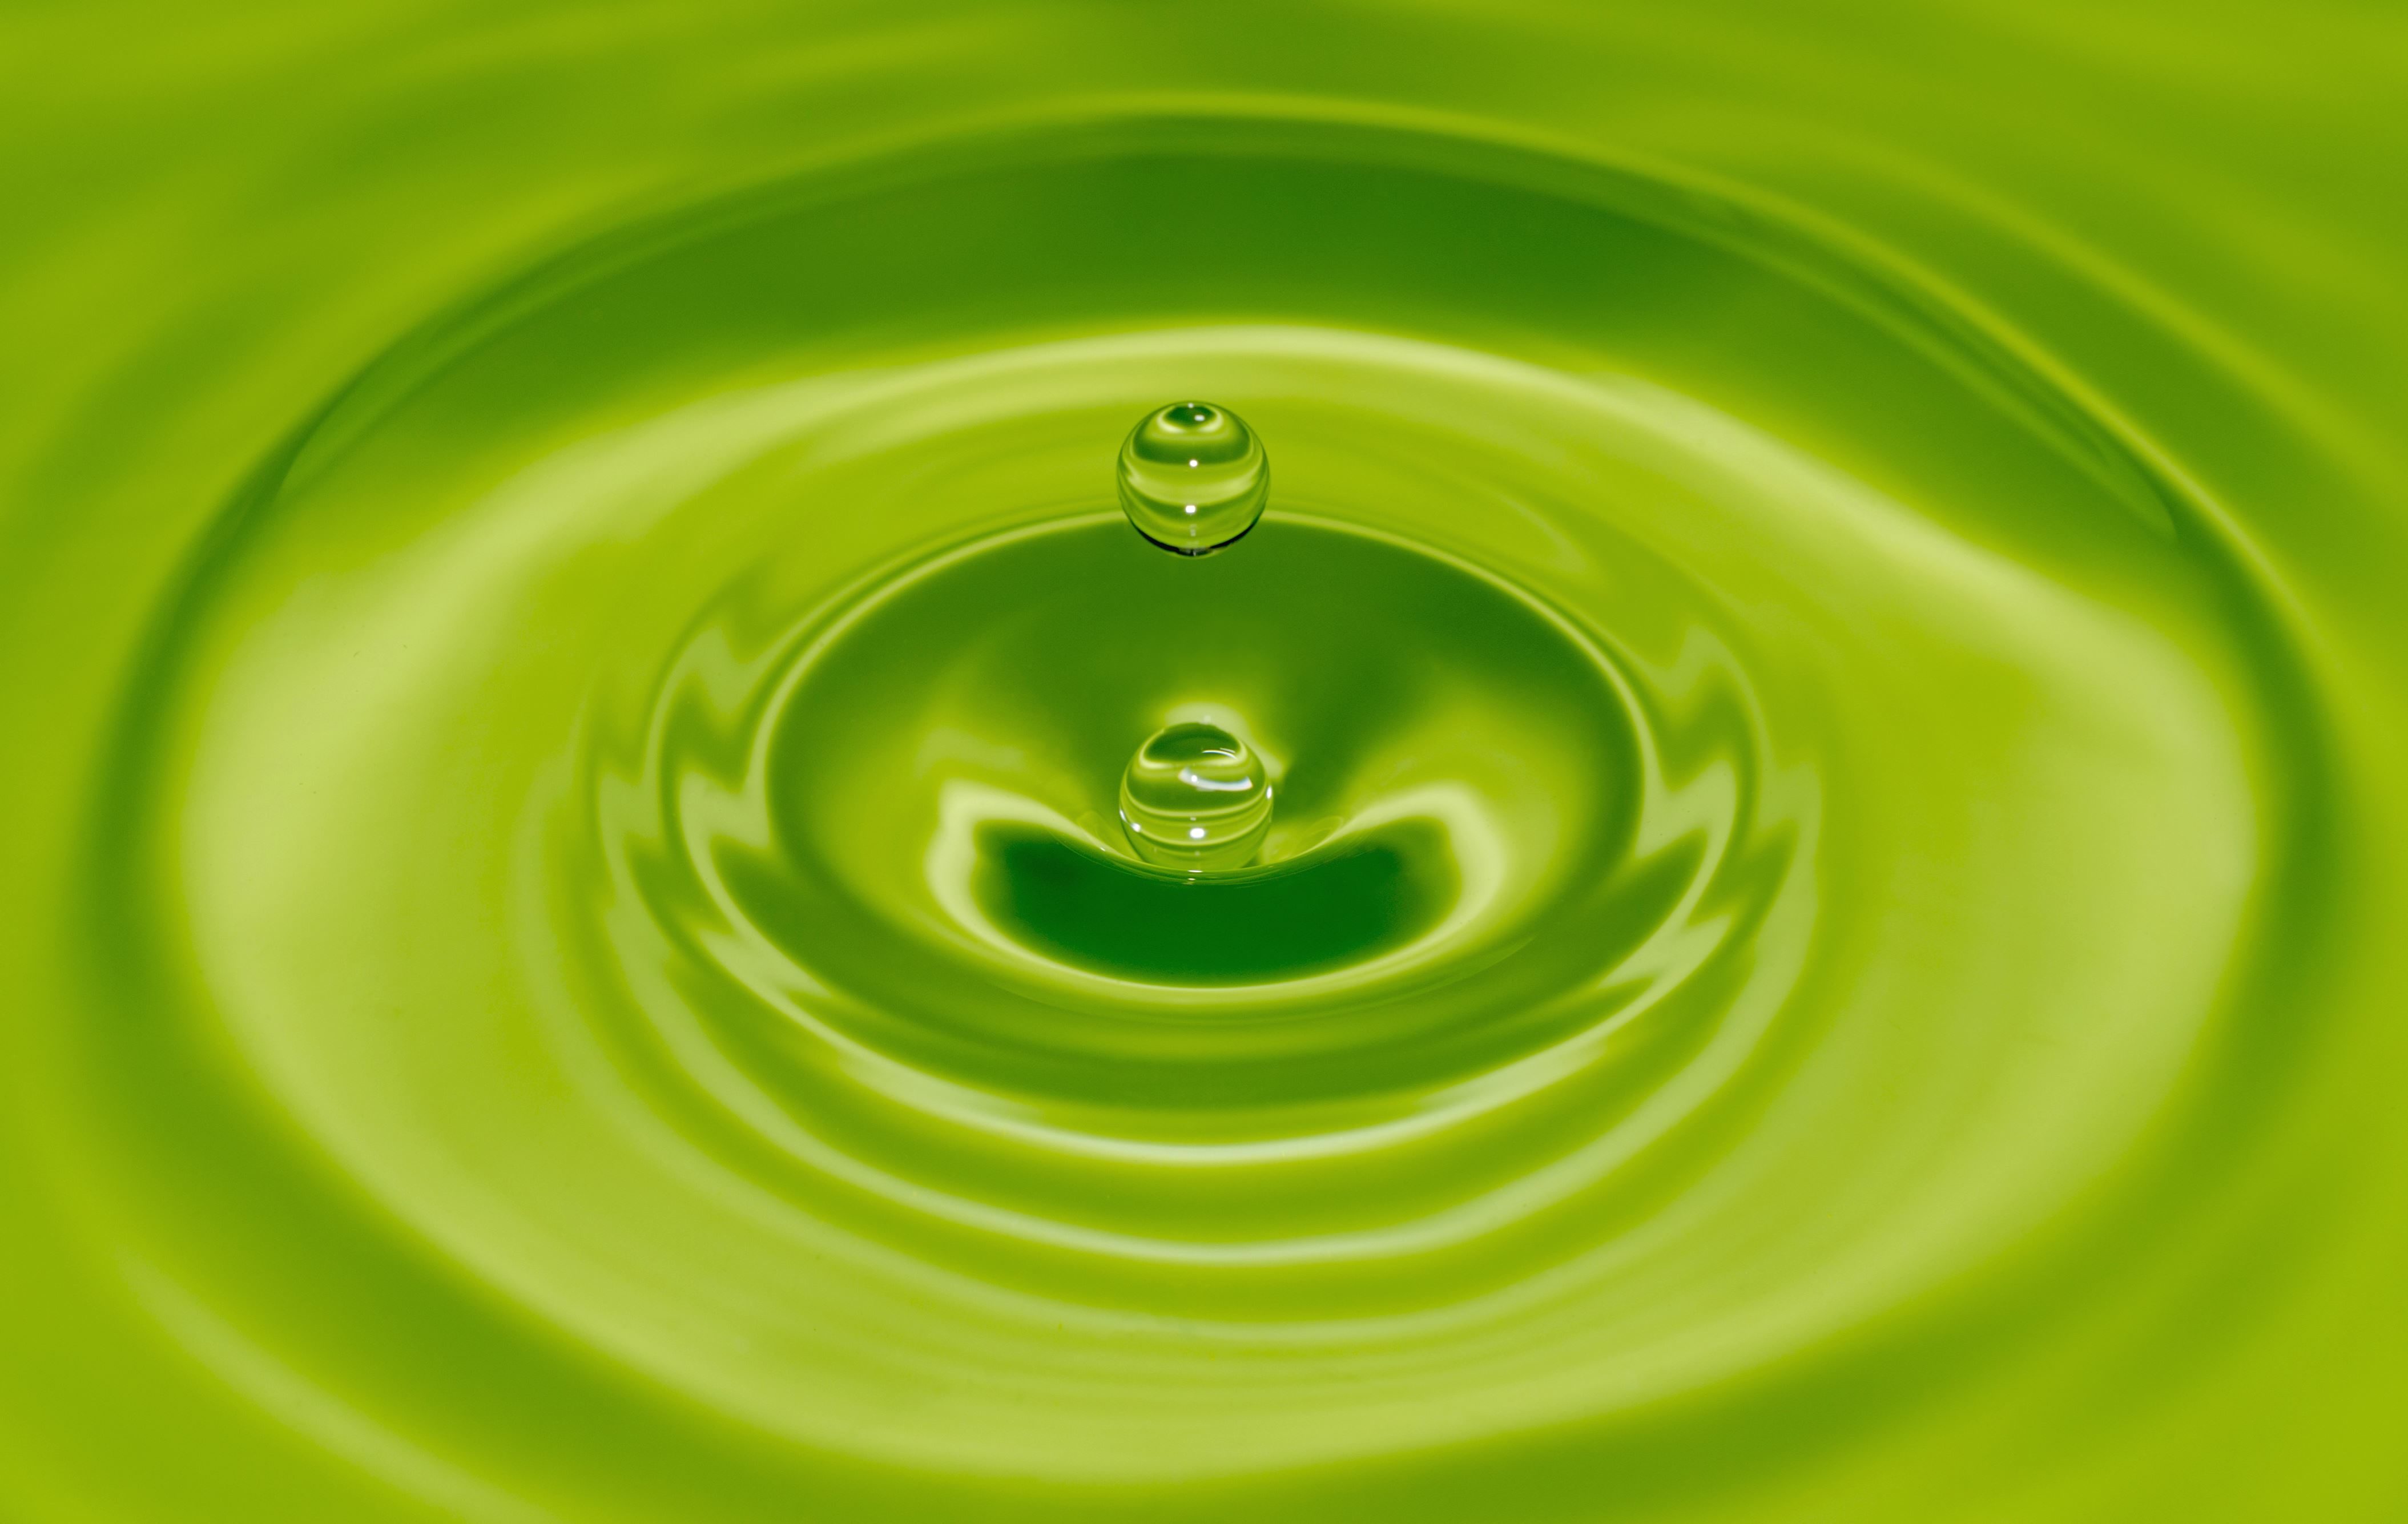 Free picture: circle, abstract, water, round, water, green